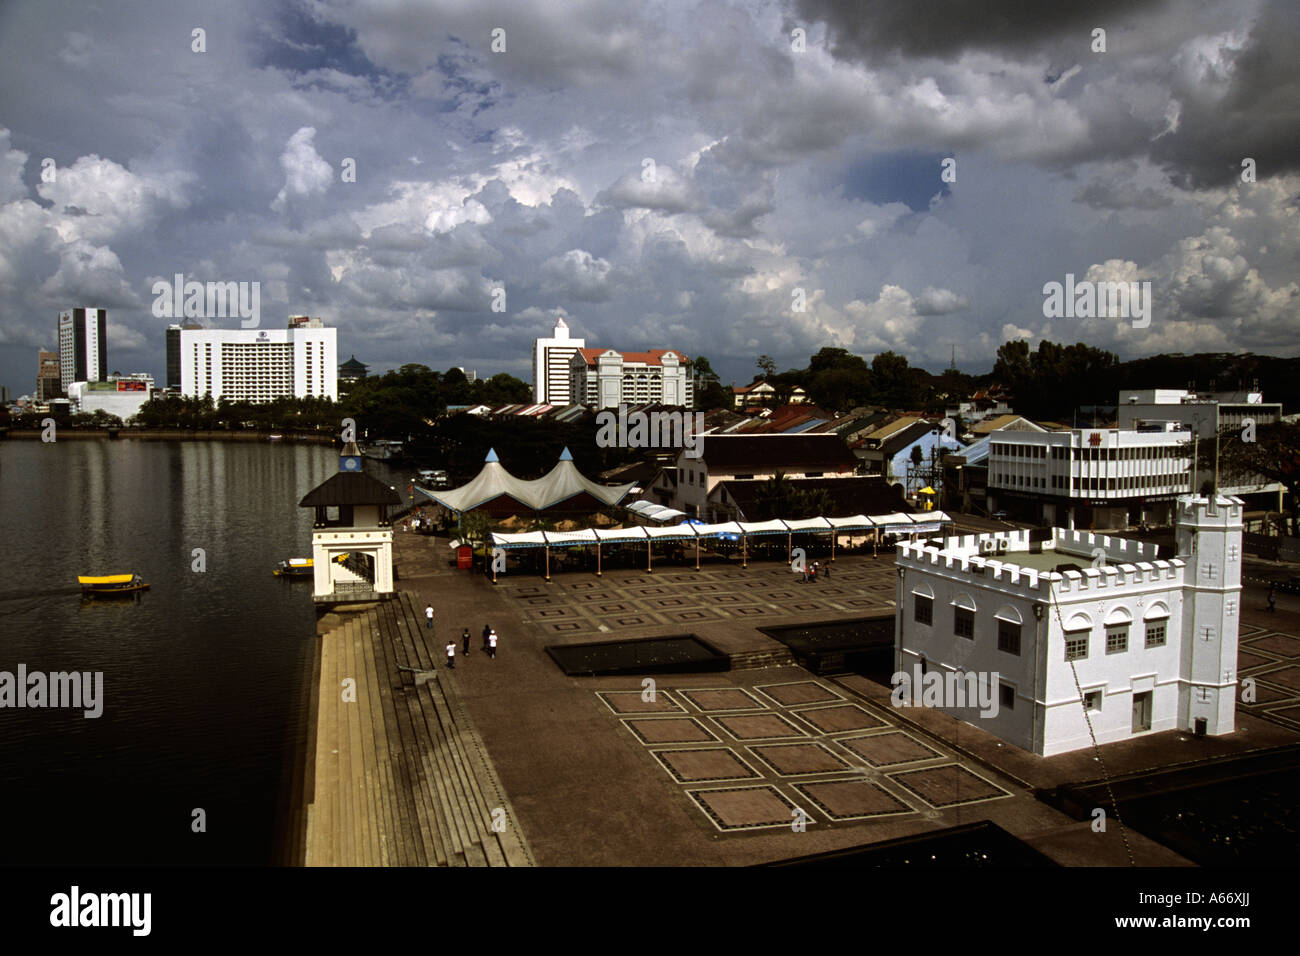 The waterfront,Kuching,Sarawak,Malaysia.Hilton Hotel in background.The square tower on right (1879) used to be a prison Stock Photo